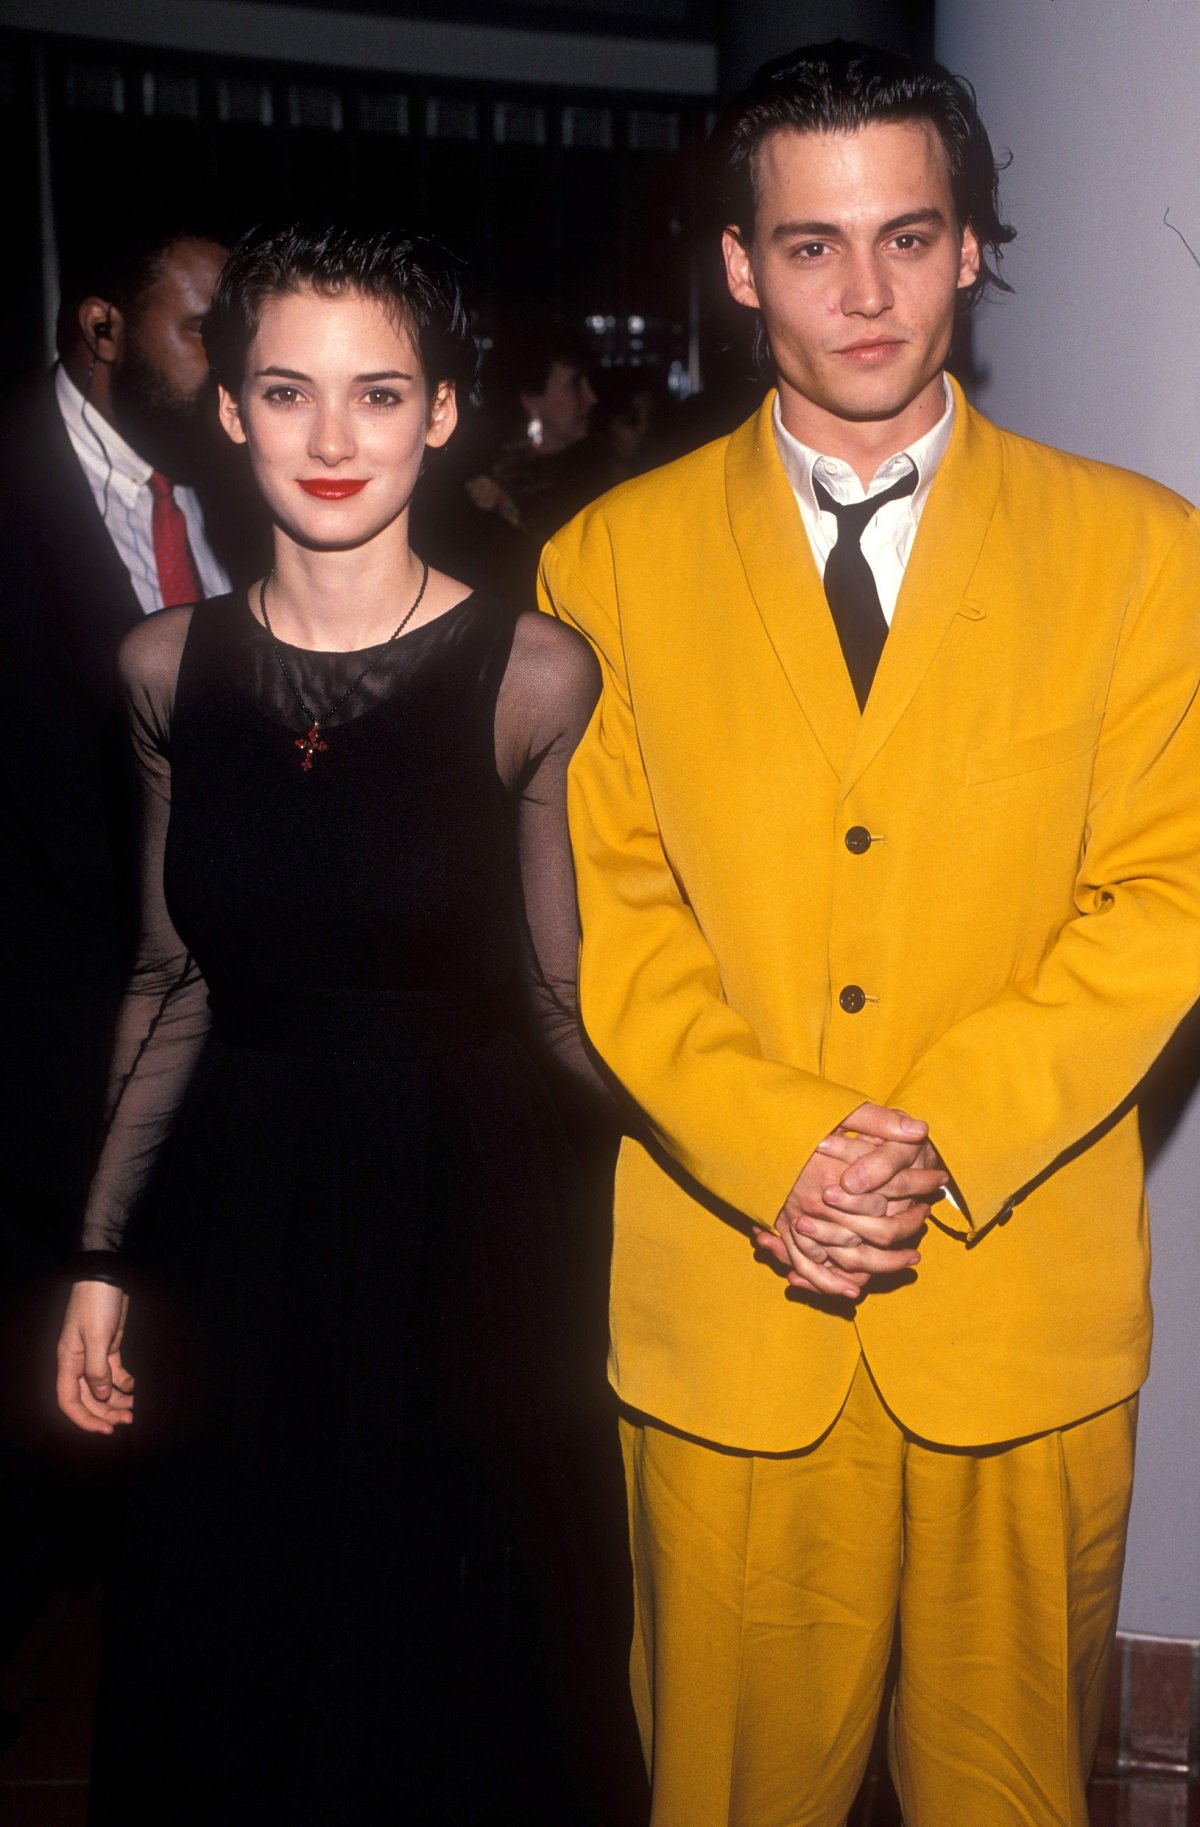 Winona Ryder and Johnny Depp at the 'Cry-Baby' premiere